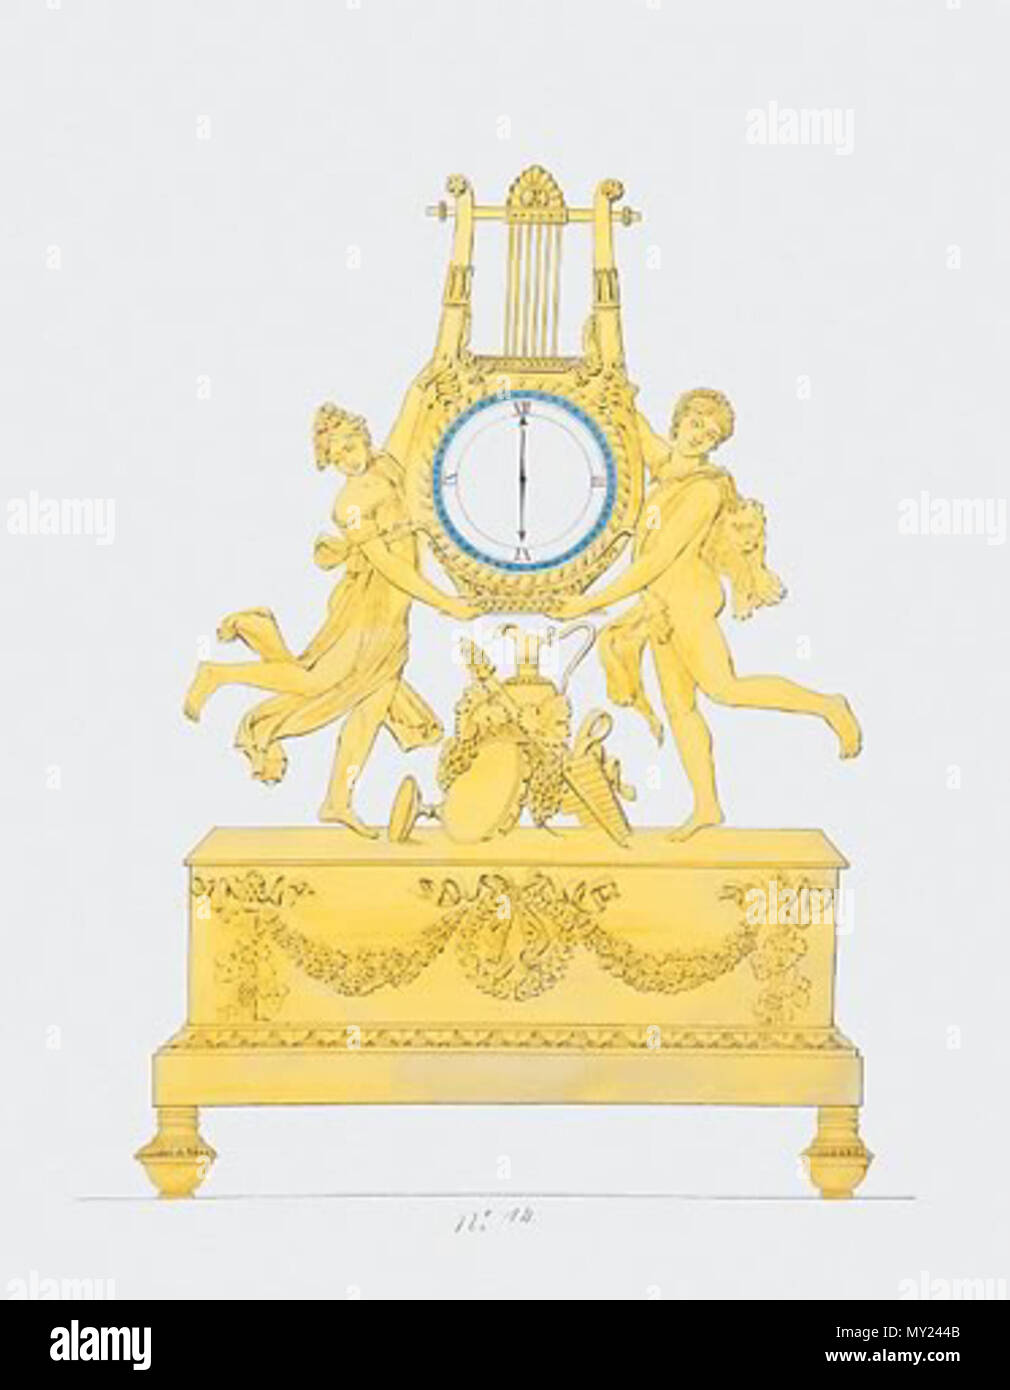 . English: Watercolour, gouache and pen and ink, on laid paper. Numbered: 14. Dimensions: 67.4cm. by 50.8cm. To be executed in gilt bronze; enamel dial within blue band. A dancing Bacchus and Bacchante displaying a lyre containing the clock above a Bacchic trophy, the garlanded frieze with thyrsus and double pipe motifs; on toupie (spinning top). This clock initially seems loaded with purely Bacchic imagery, as Satyrs and Bacchantes formed the retinue of Bacchus. Thus the trophy includes a Bacchante’s tambourine, bunches of grapes and a ewer and wine cup for convivial drinking, whereas the fri Stock Photo